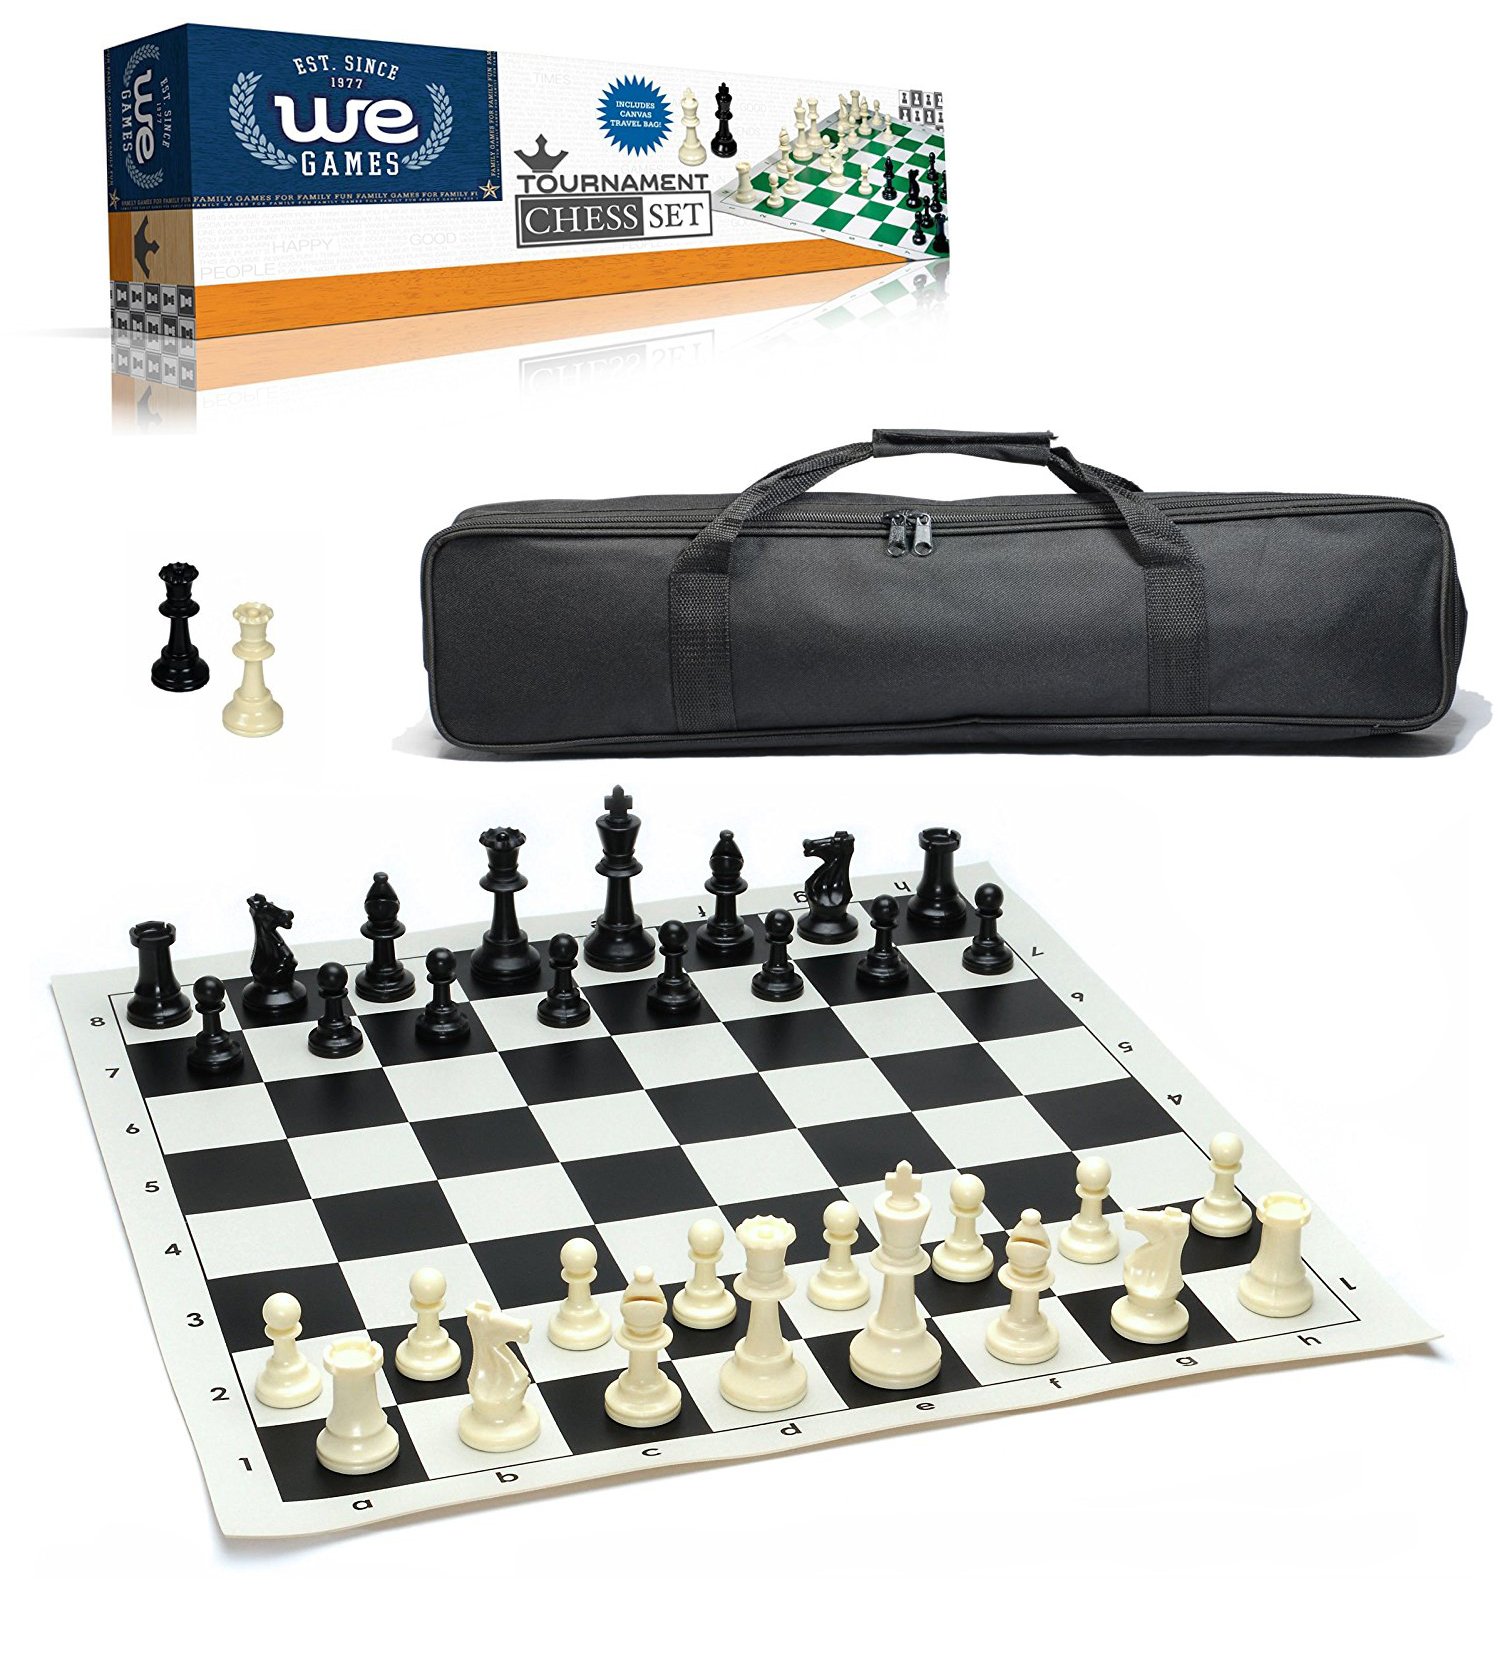 Tournament Chess Set - Plastic Pieces with Black Roll-Up Chess Board and Travel Canvass Bag (101121)